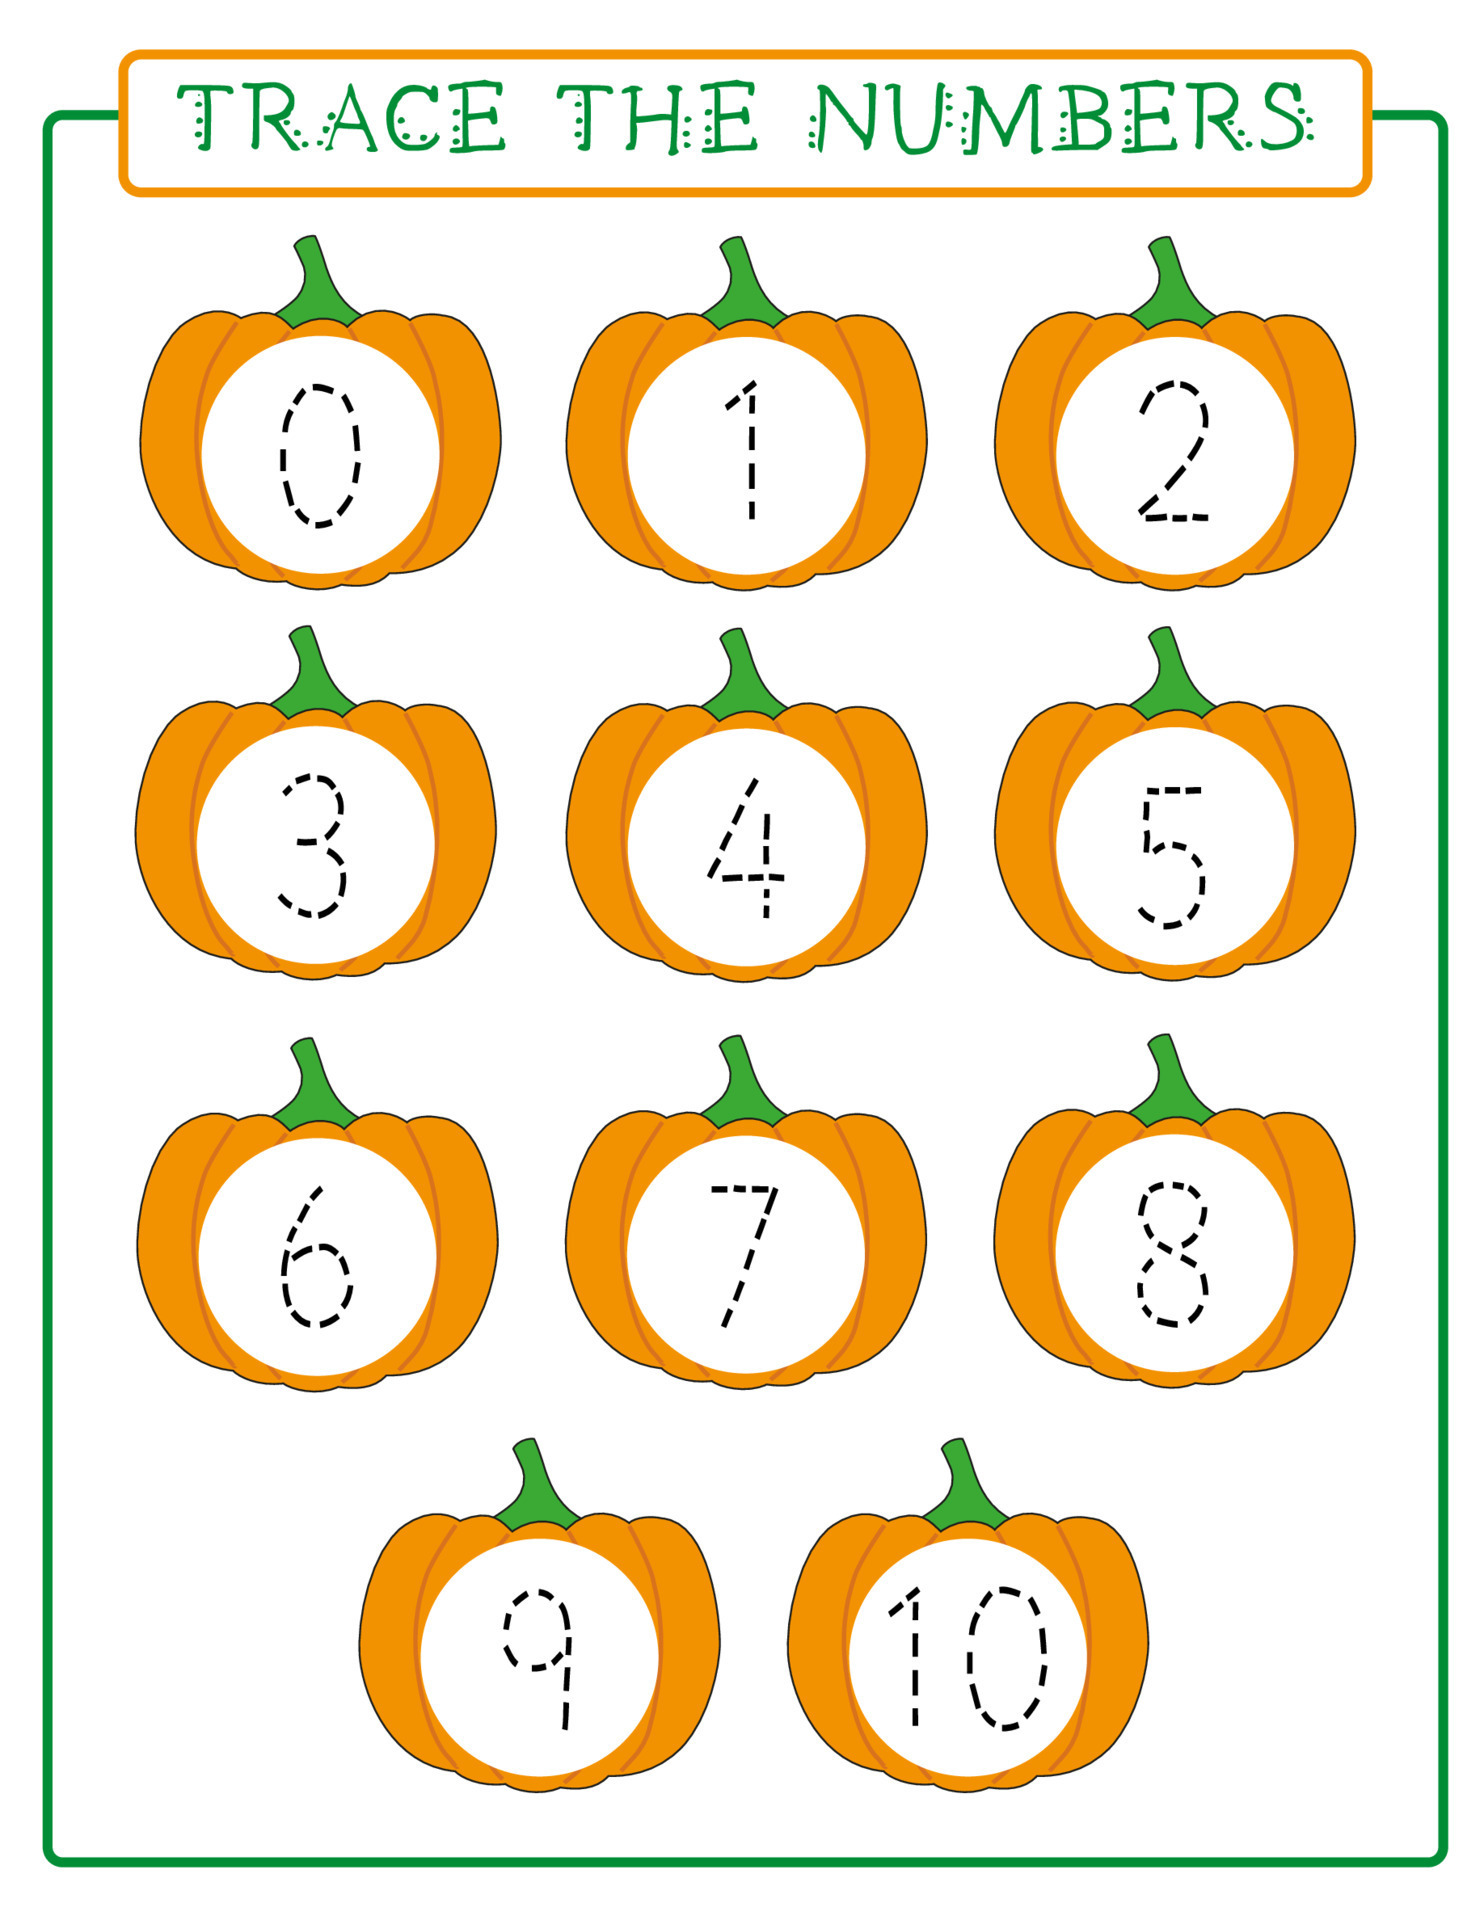 Trace the numbers worksheet for kids. Fall themed activity for children